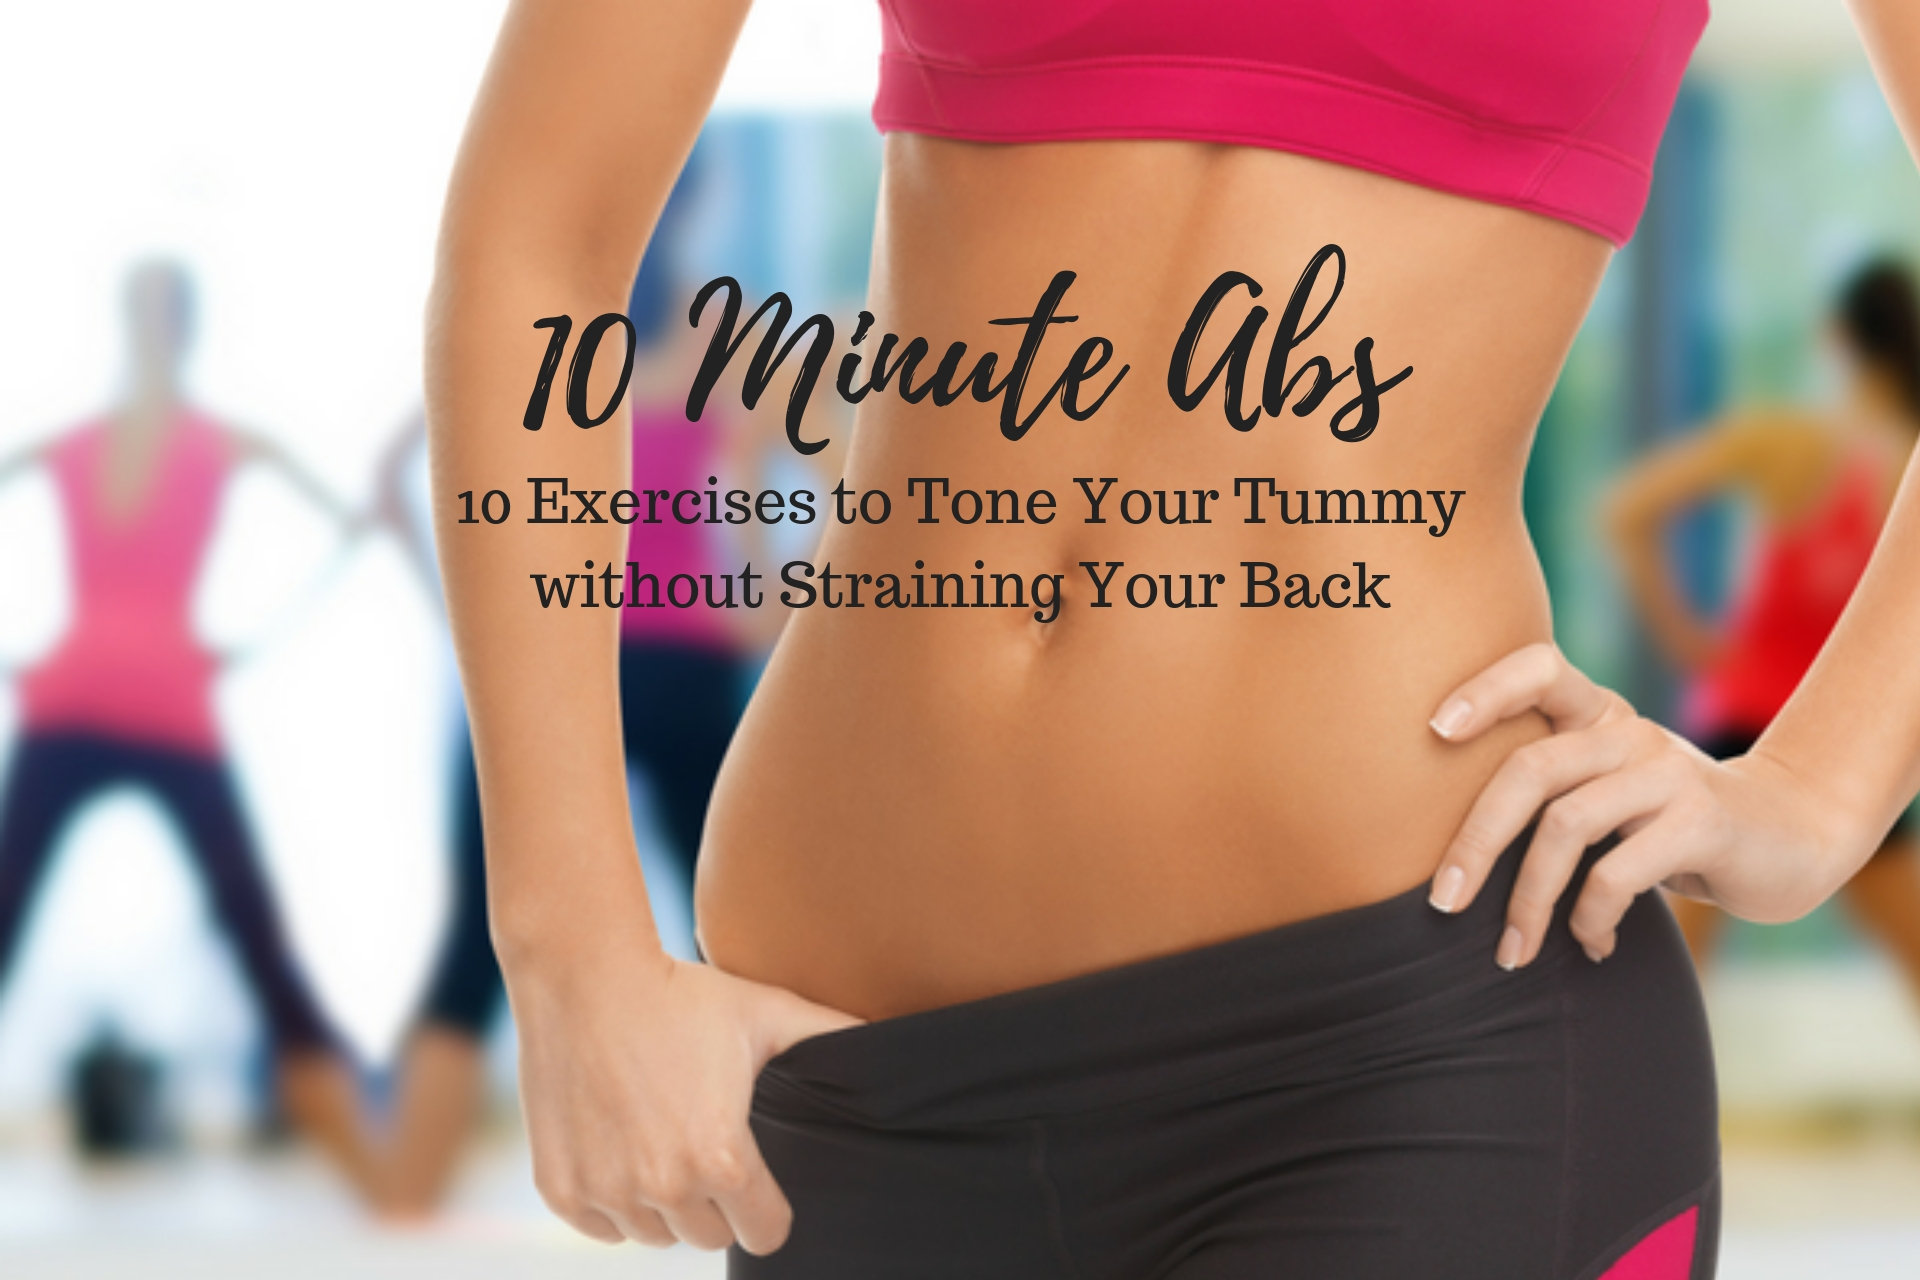 10 Minute Abs (10 Exercises to Tone your Tummy without Straining